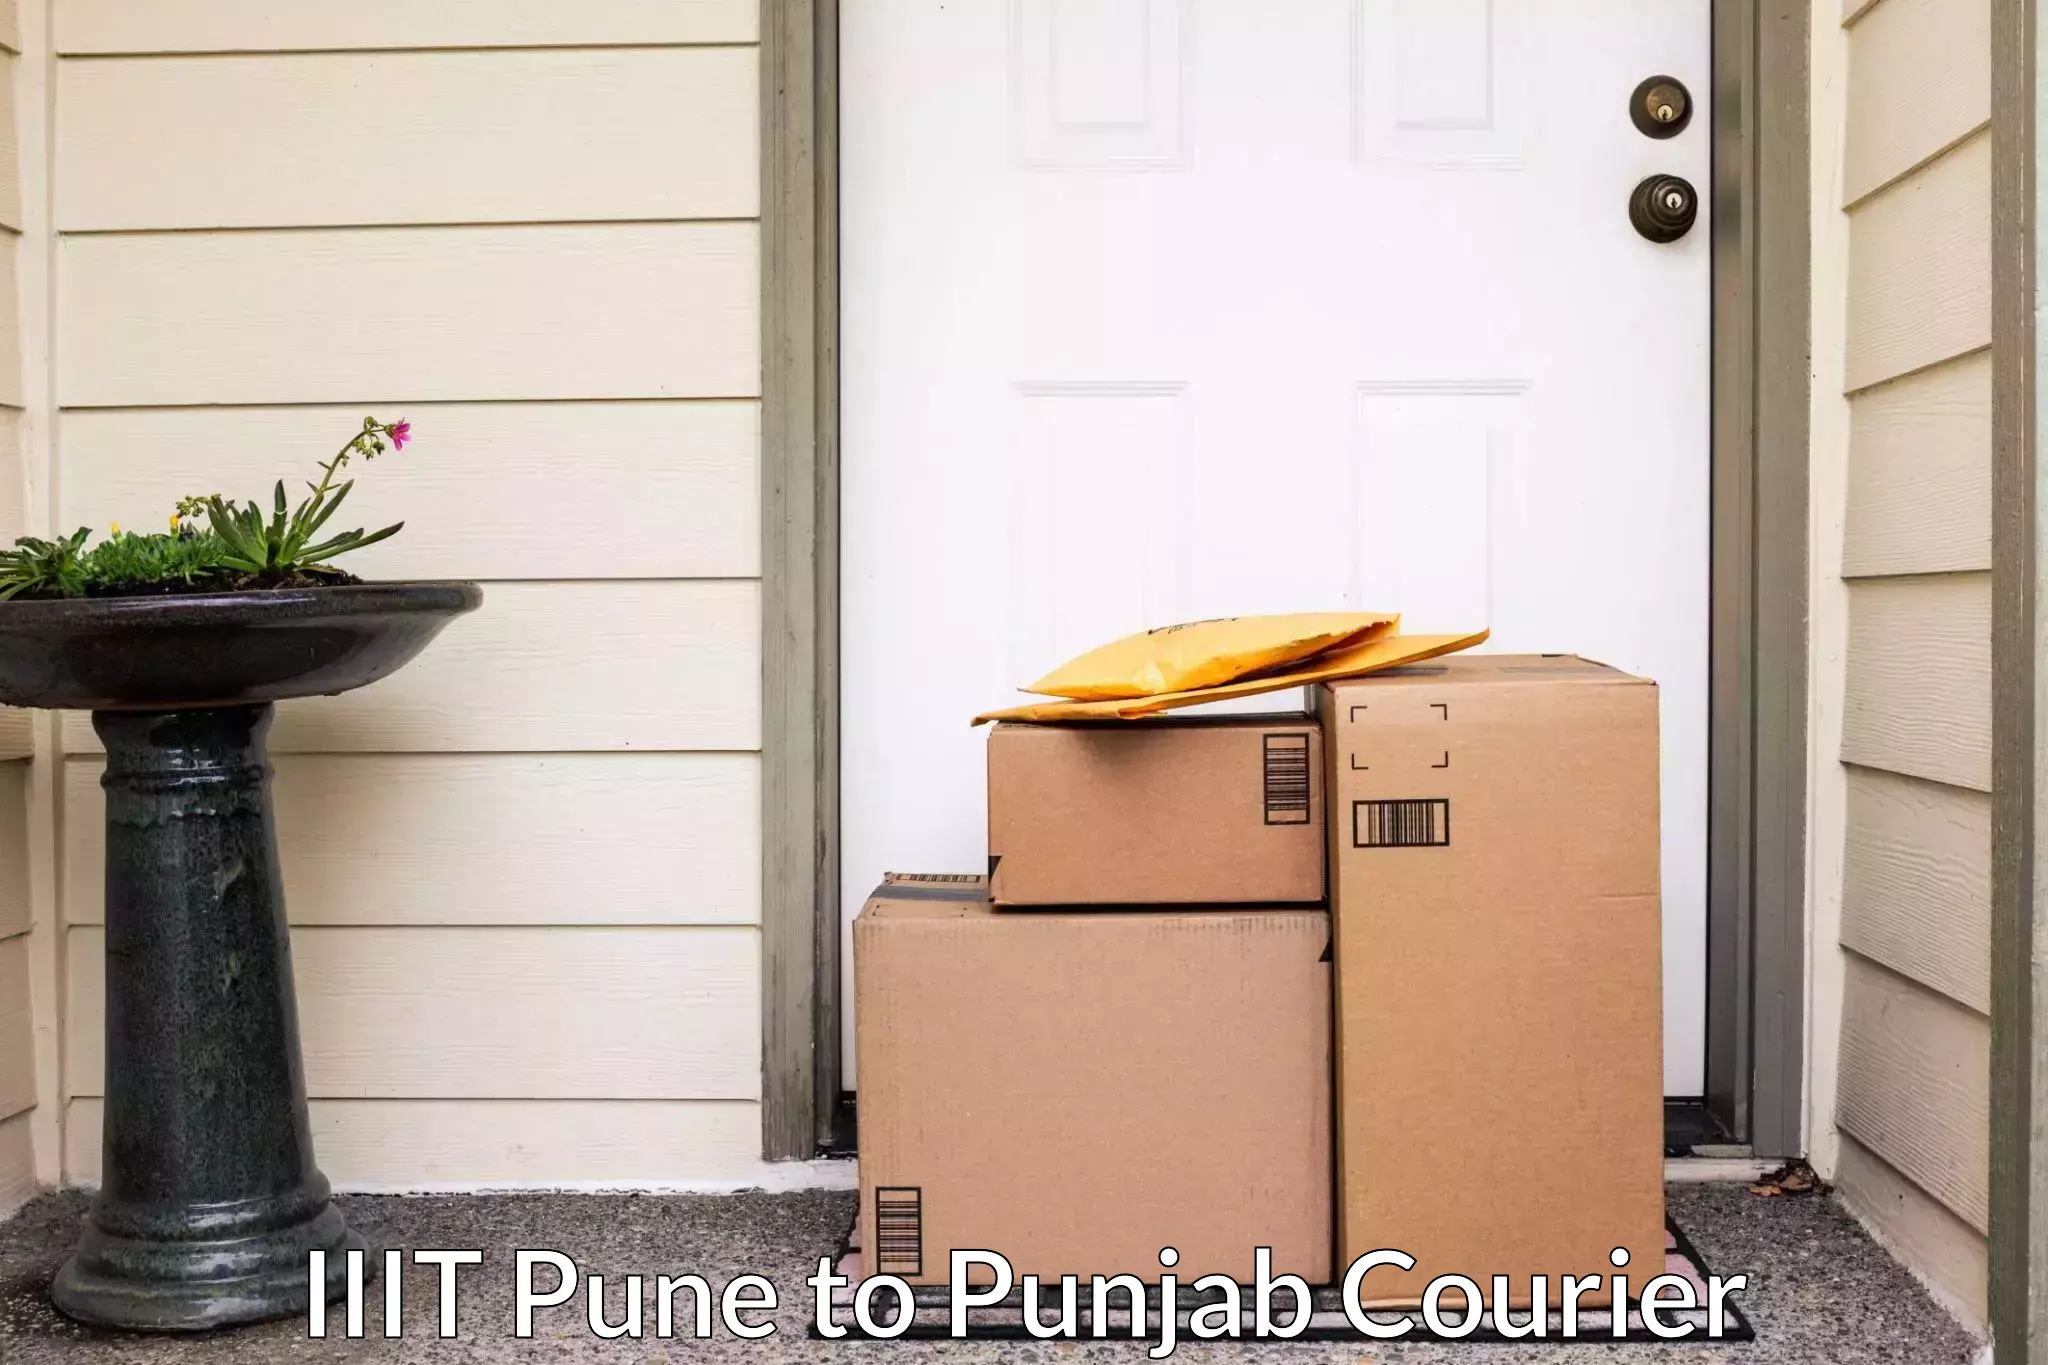 Specialized moving company IIIT Pune to Dinanagar